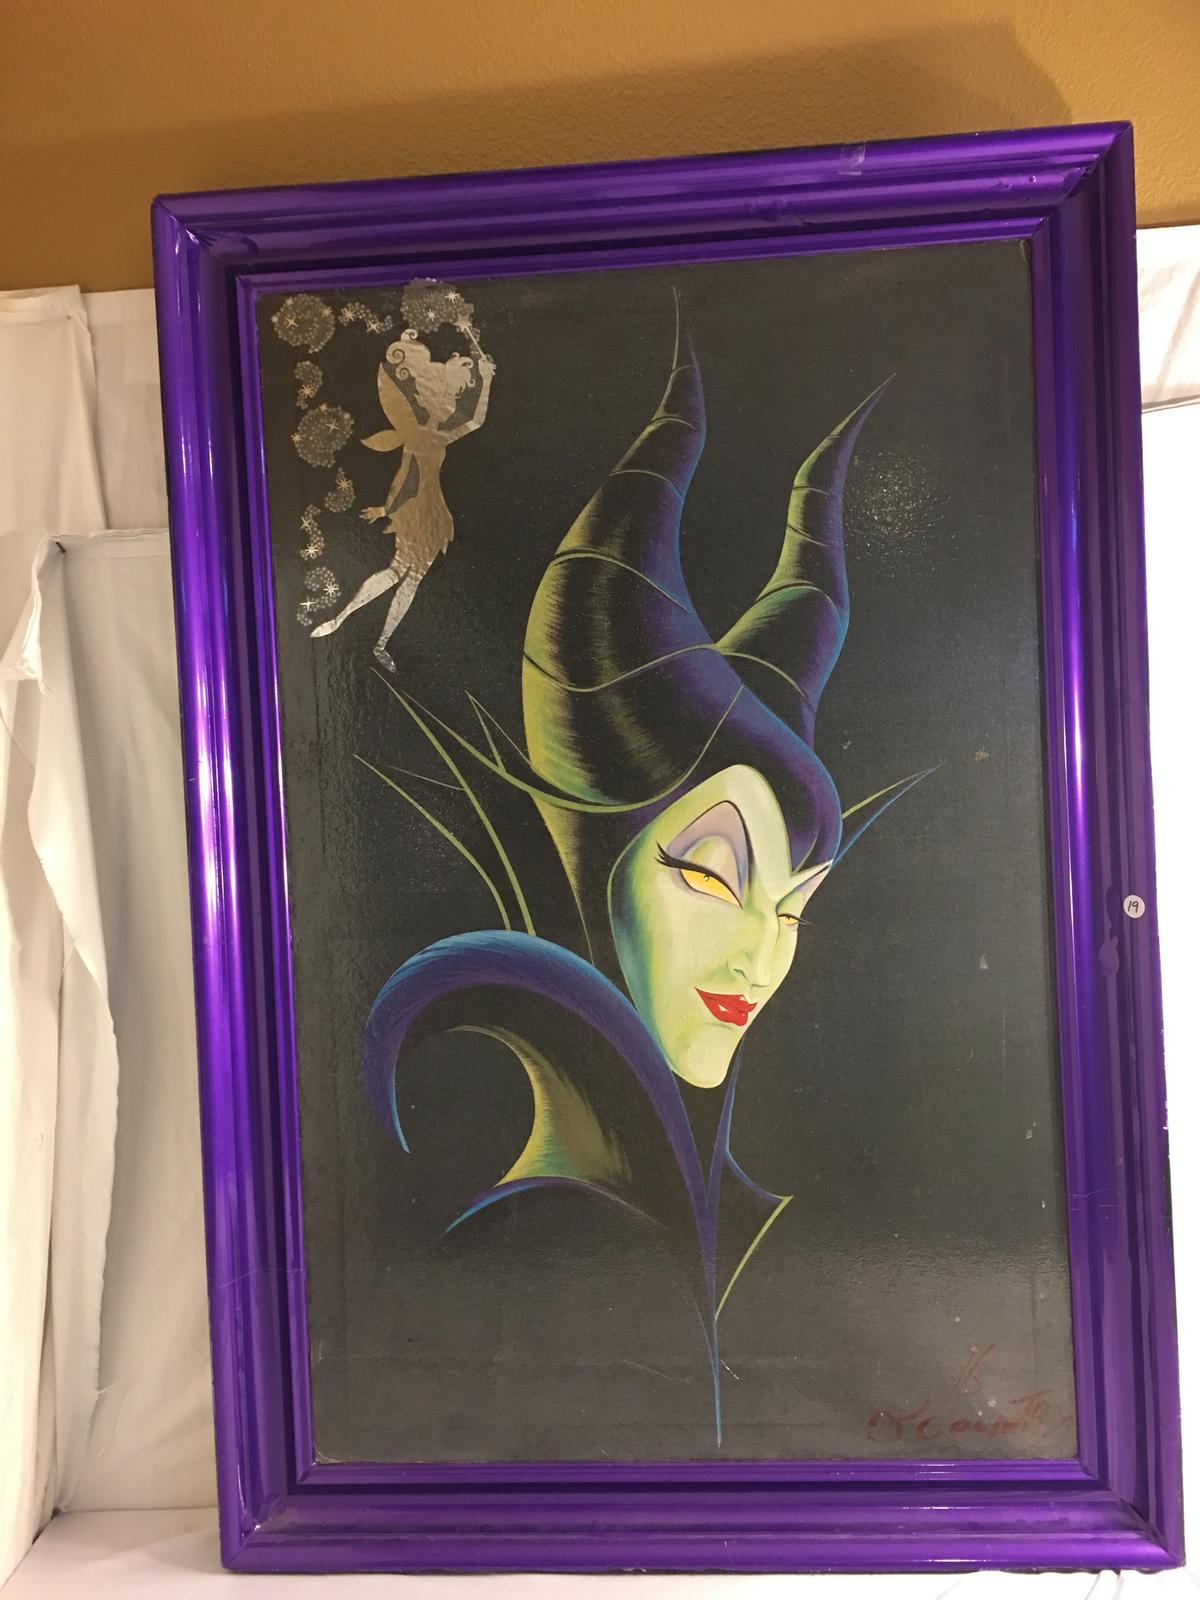 Collector Original Painting On Canvas Signed "Evil Queen" From Snow white & Seven Drwafts in Frame